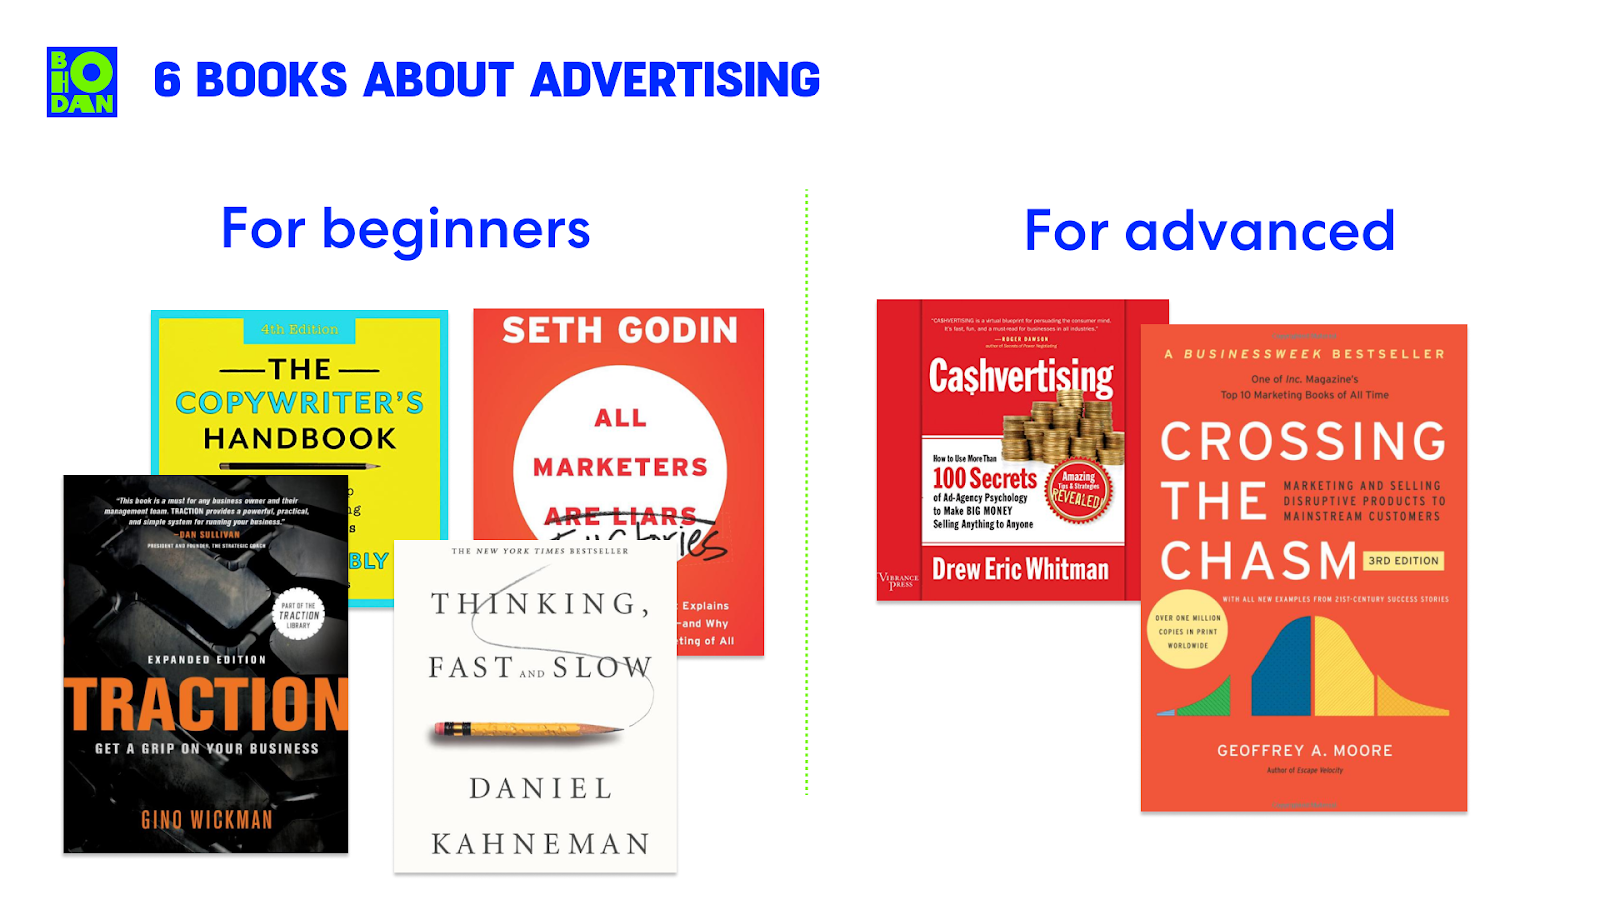 25 books for specialists in product and marketing roles